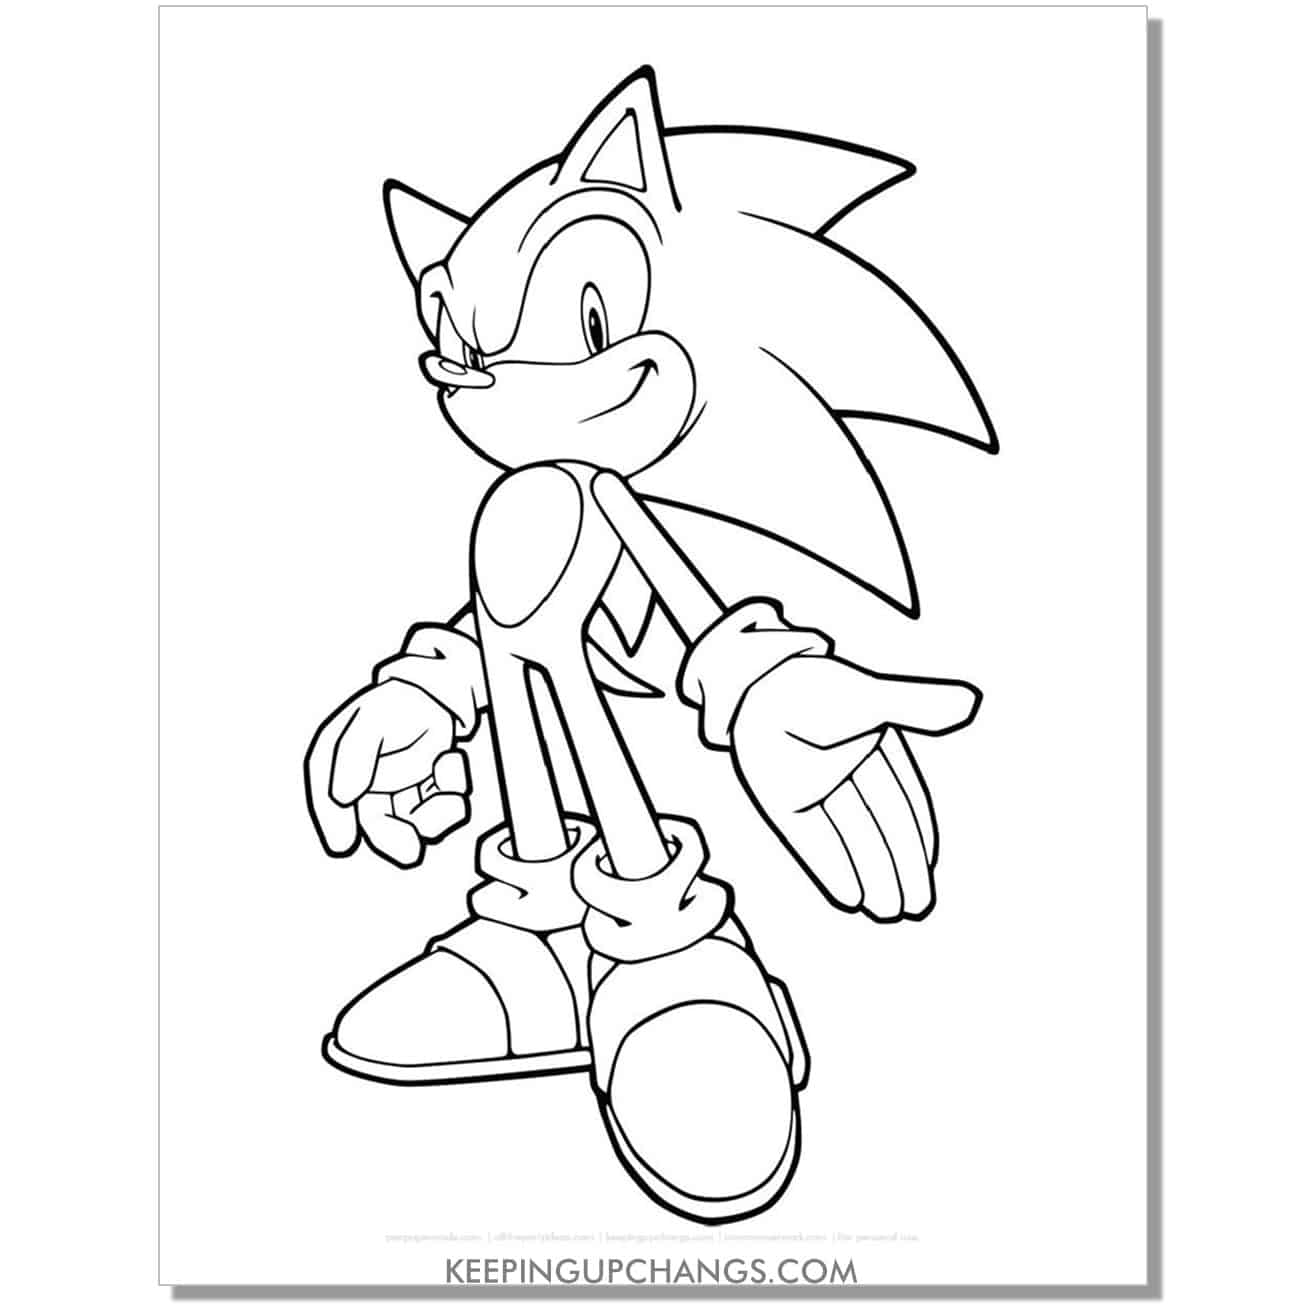 sonic looking down with palm out coloring page.